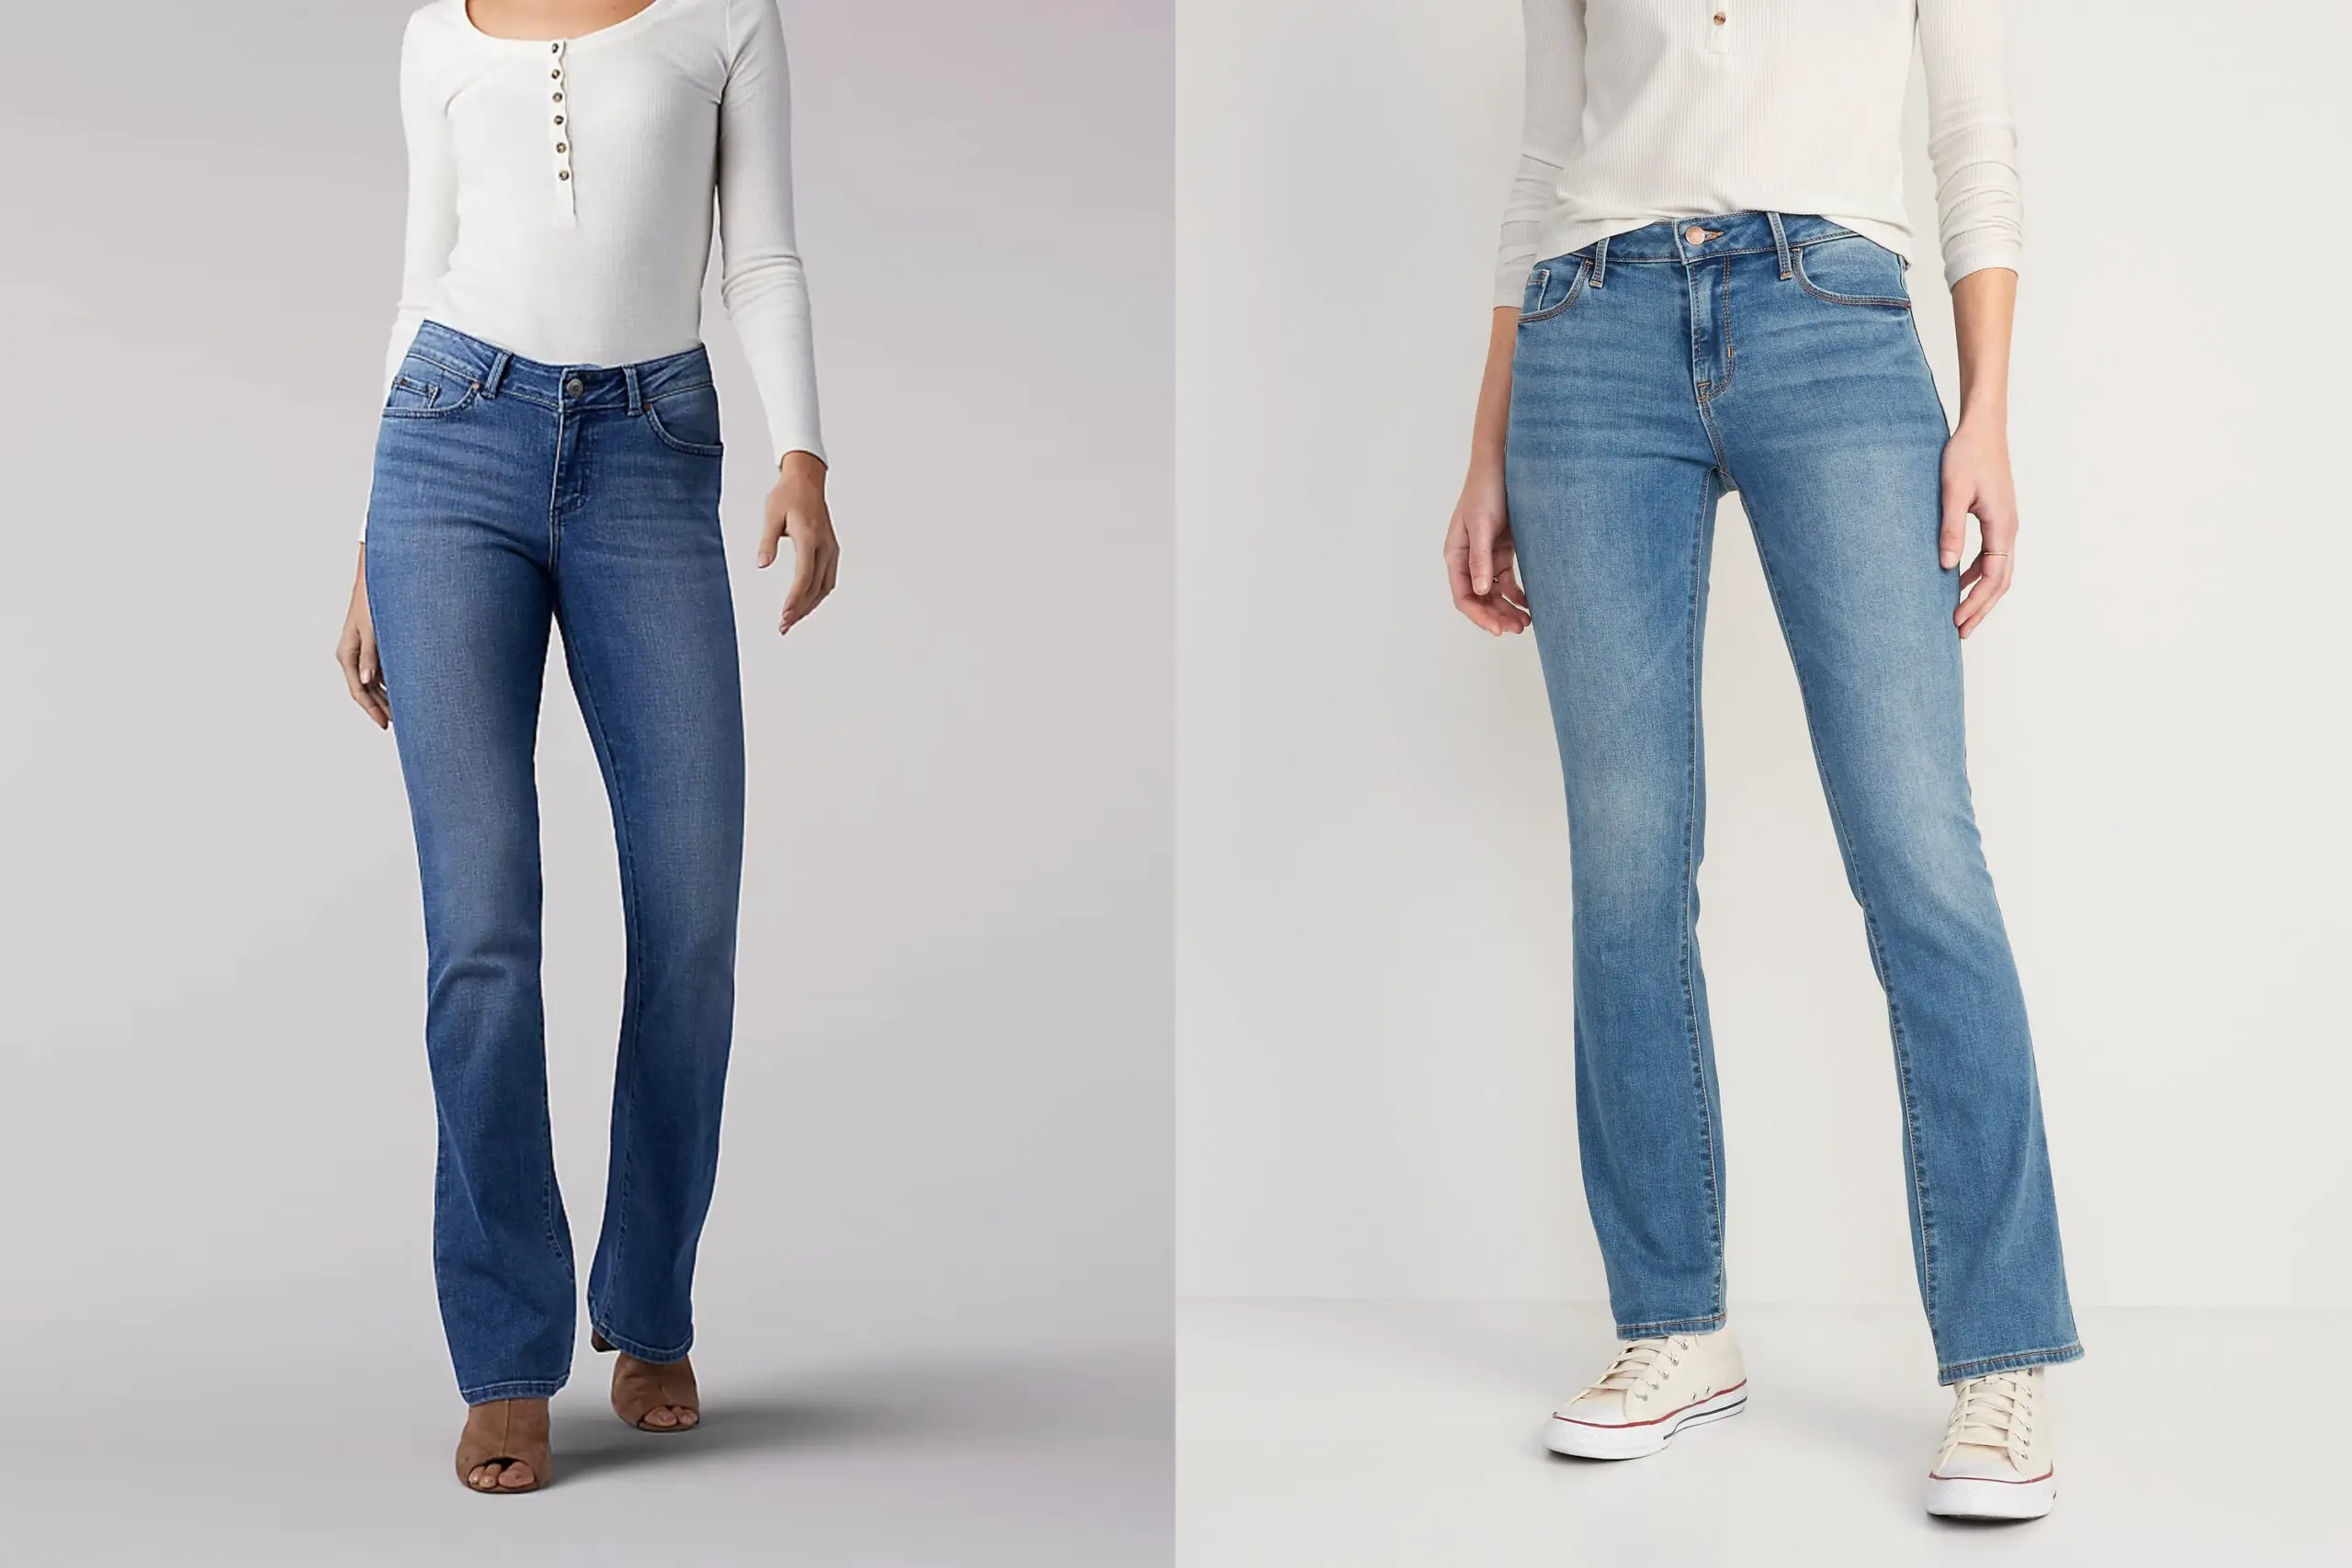 Bootcut Vs Kicker Bootcut Jeans: Are they Different? | Work Gearz